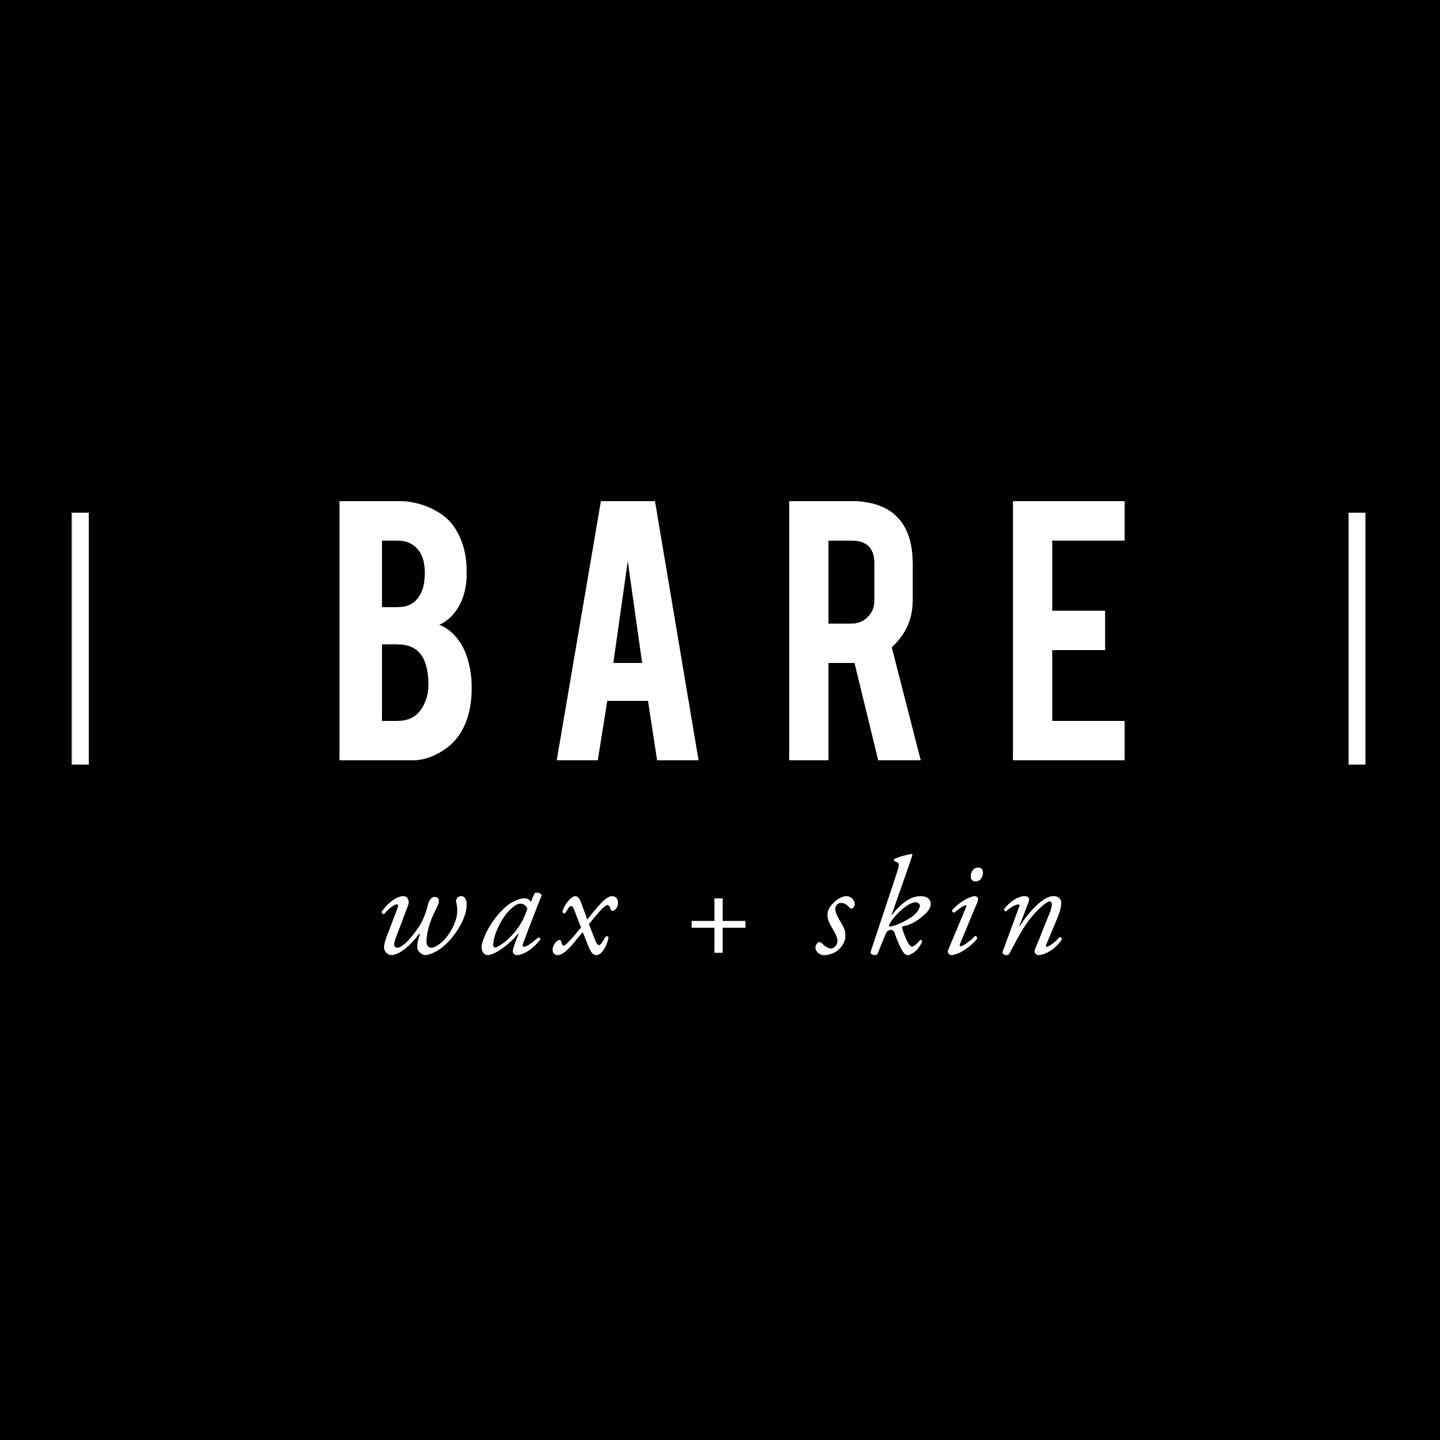 Frequently Asked Questions — BARE wax + skin